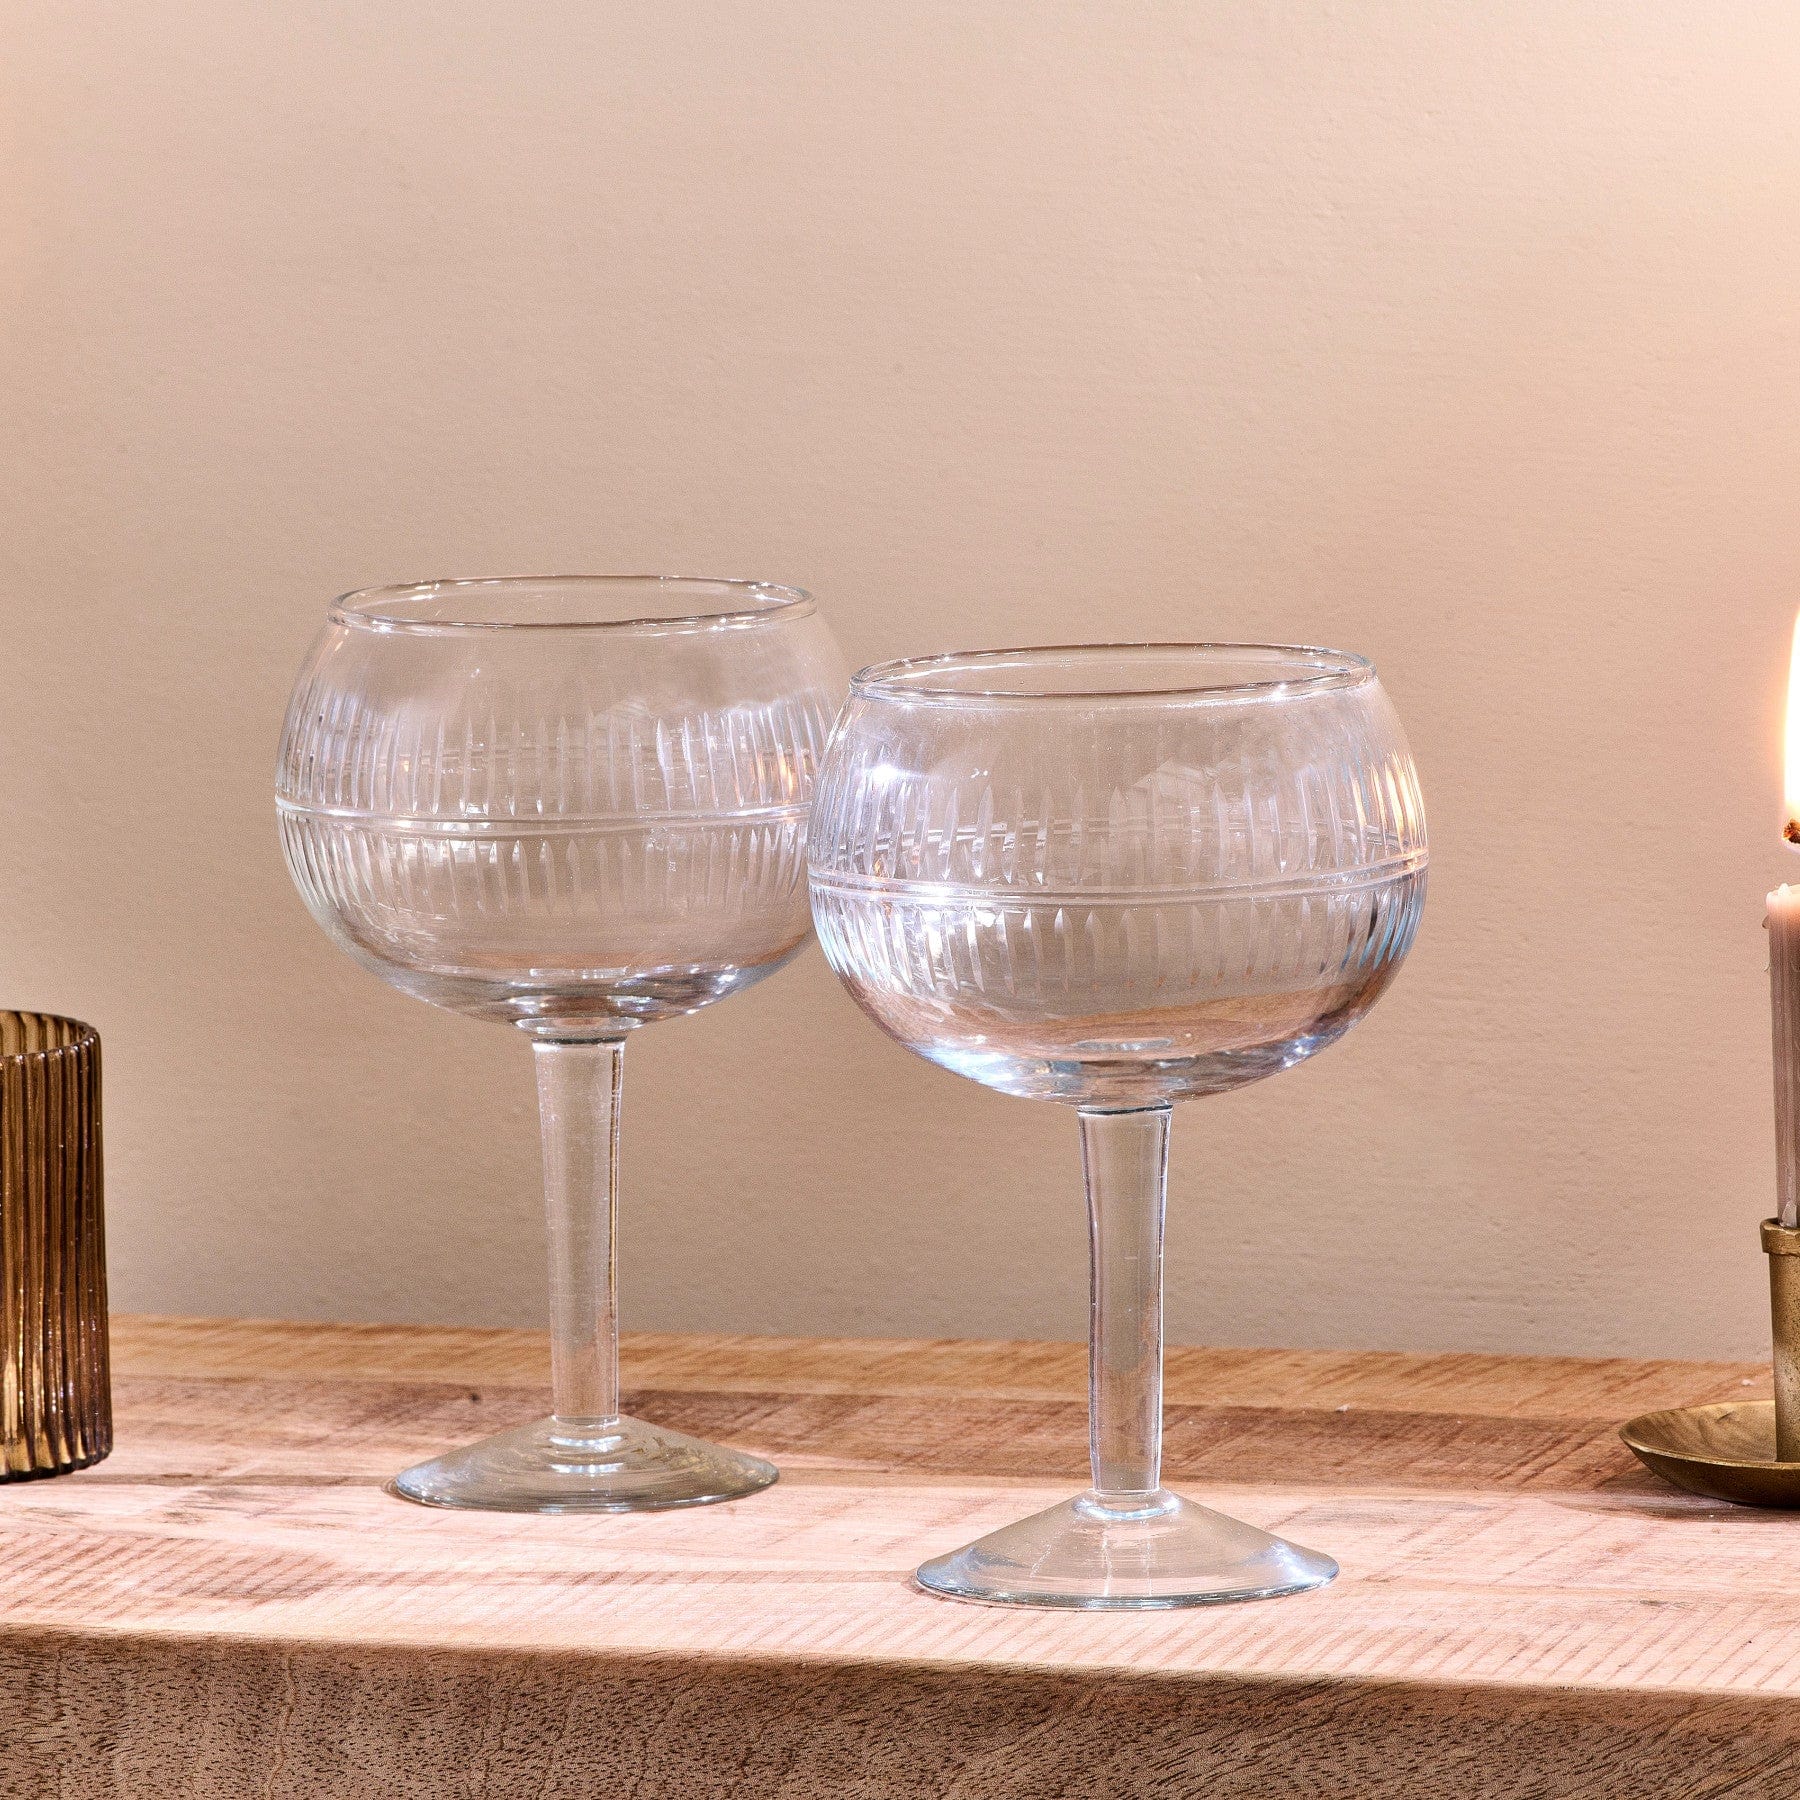 Two empty ribbed glass goblets on wooden surface with warm ambient lighting and candle in background.